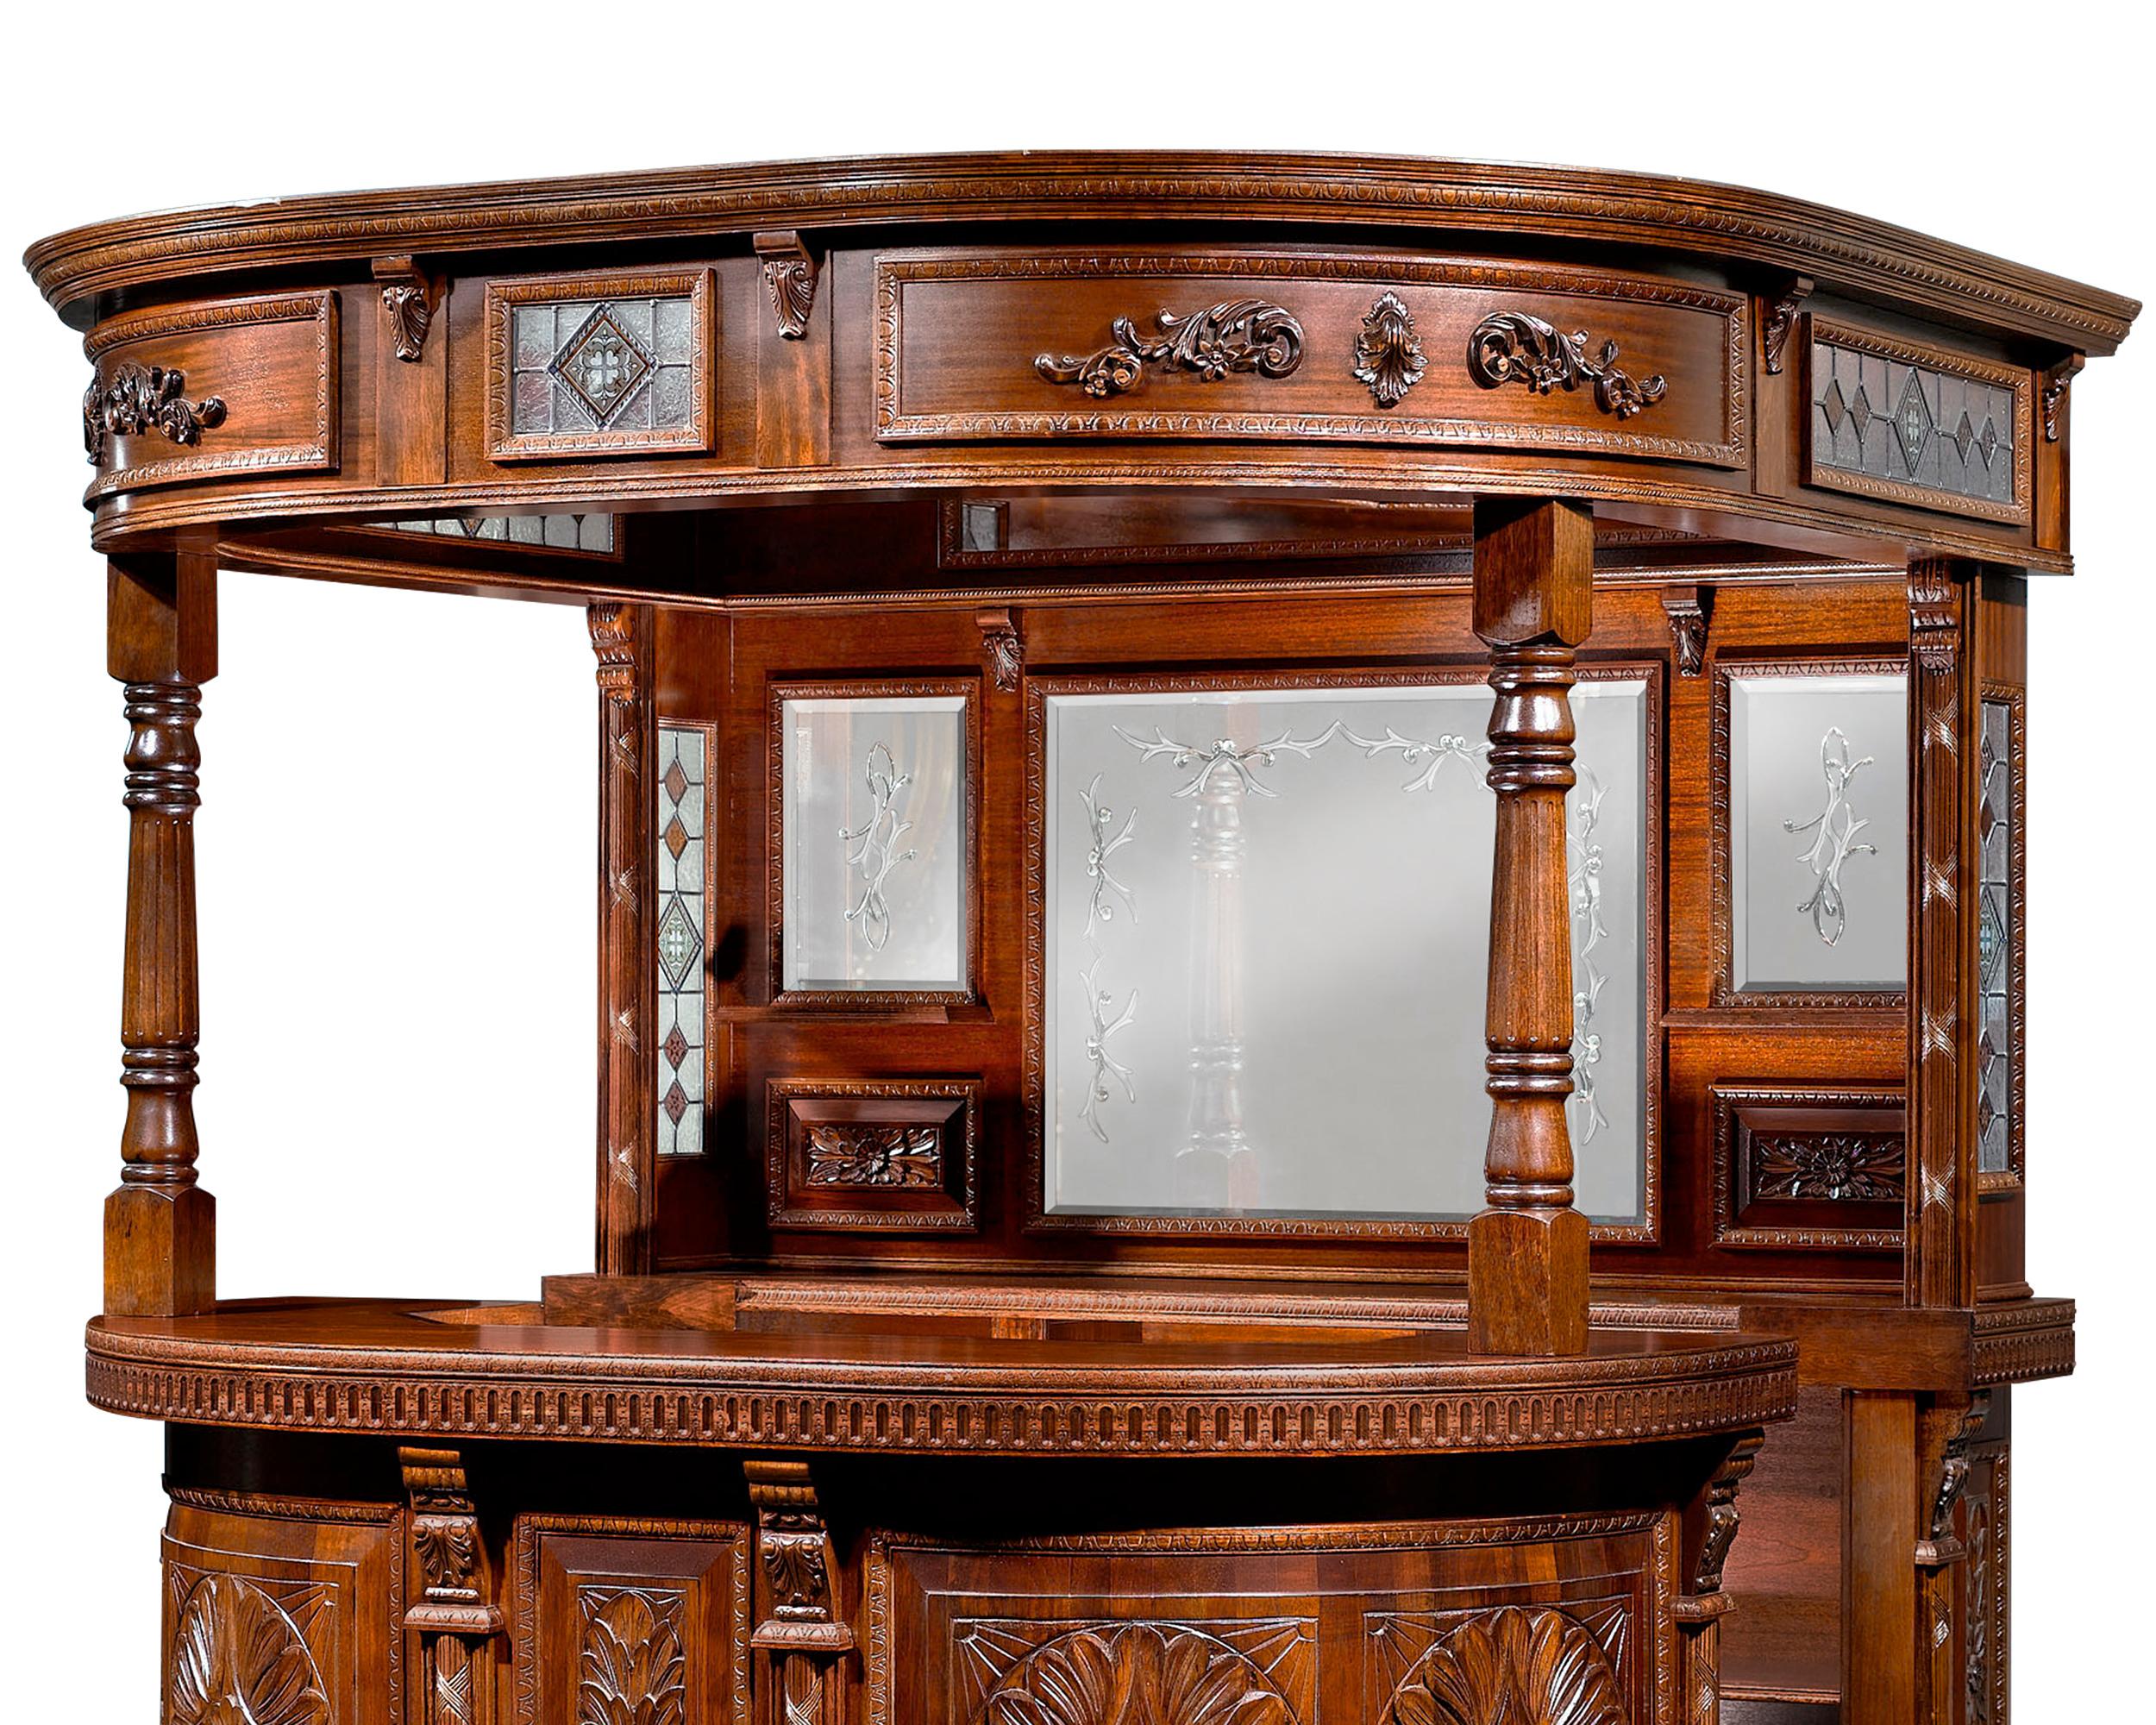 This monumental Victorian mahogany canopied bar possesses an airy spaciousness thanks to stained glass panels of superb quality and craftsmanship. Placed in the canopy and on the sides of bar, the colorful panes beautifully complement the bar's